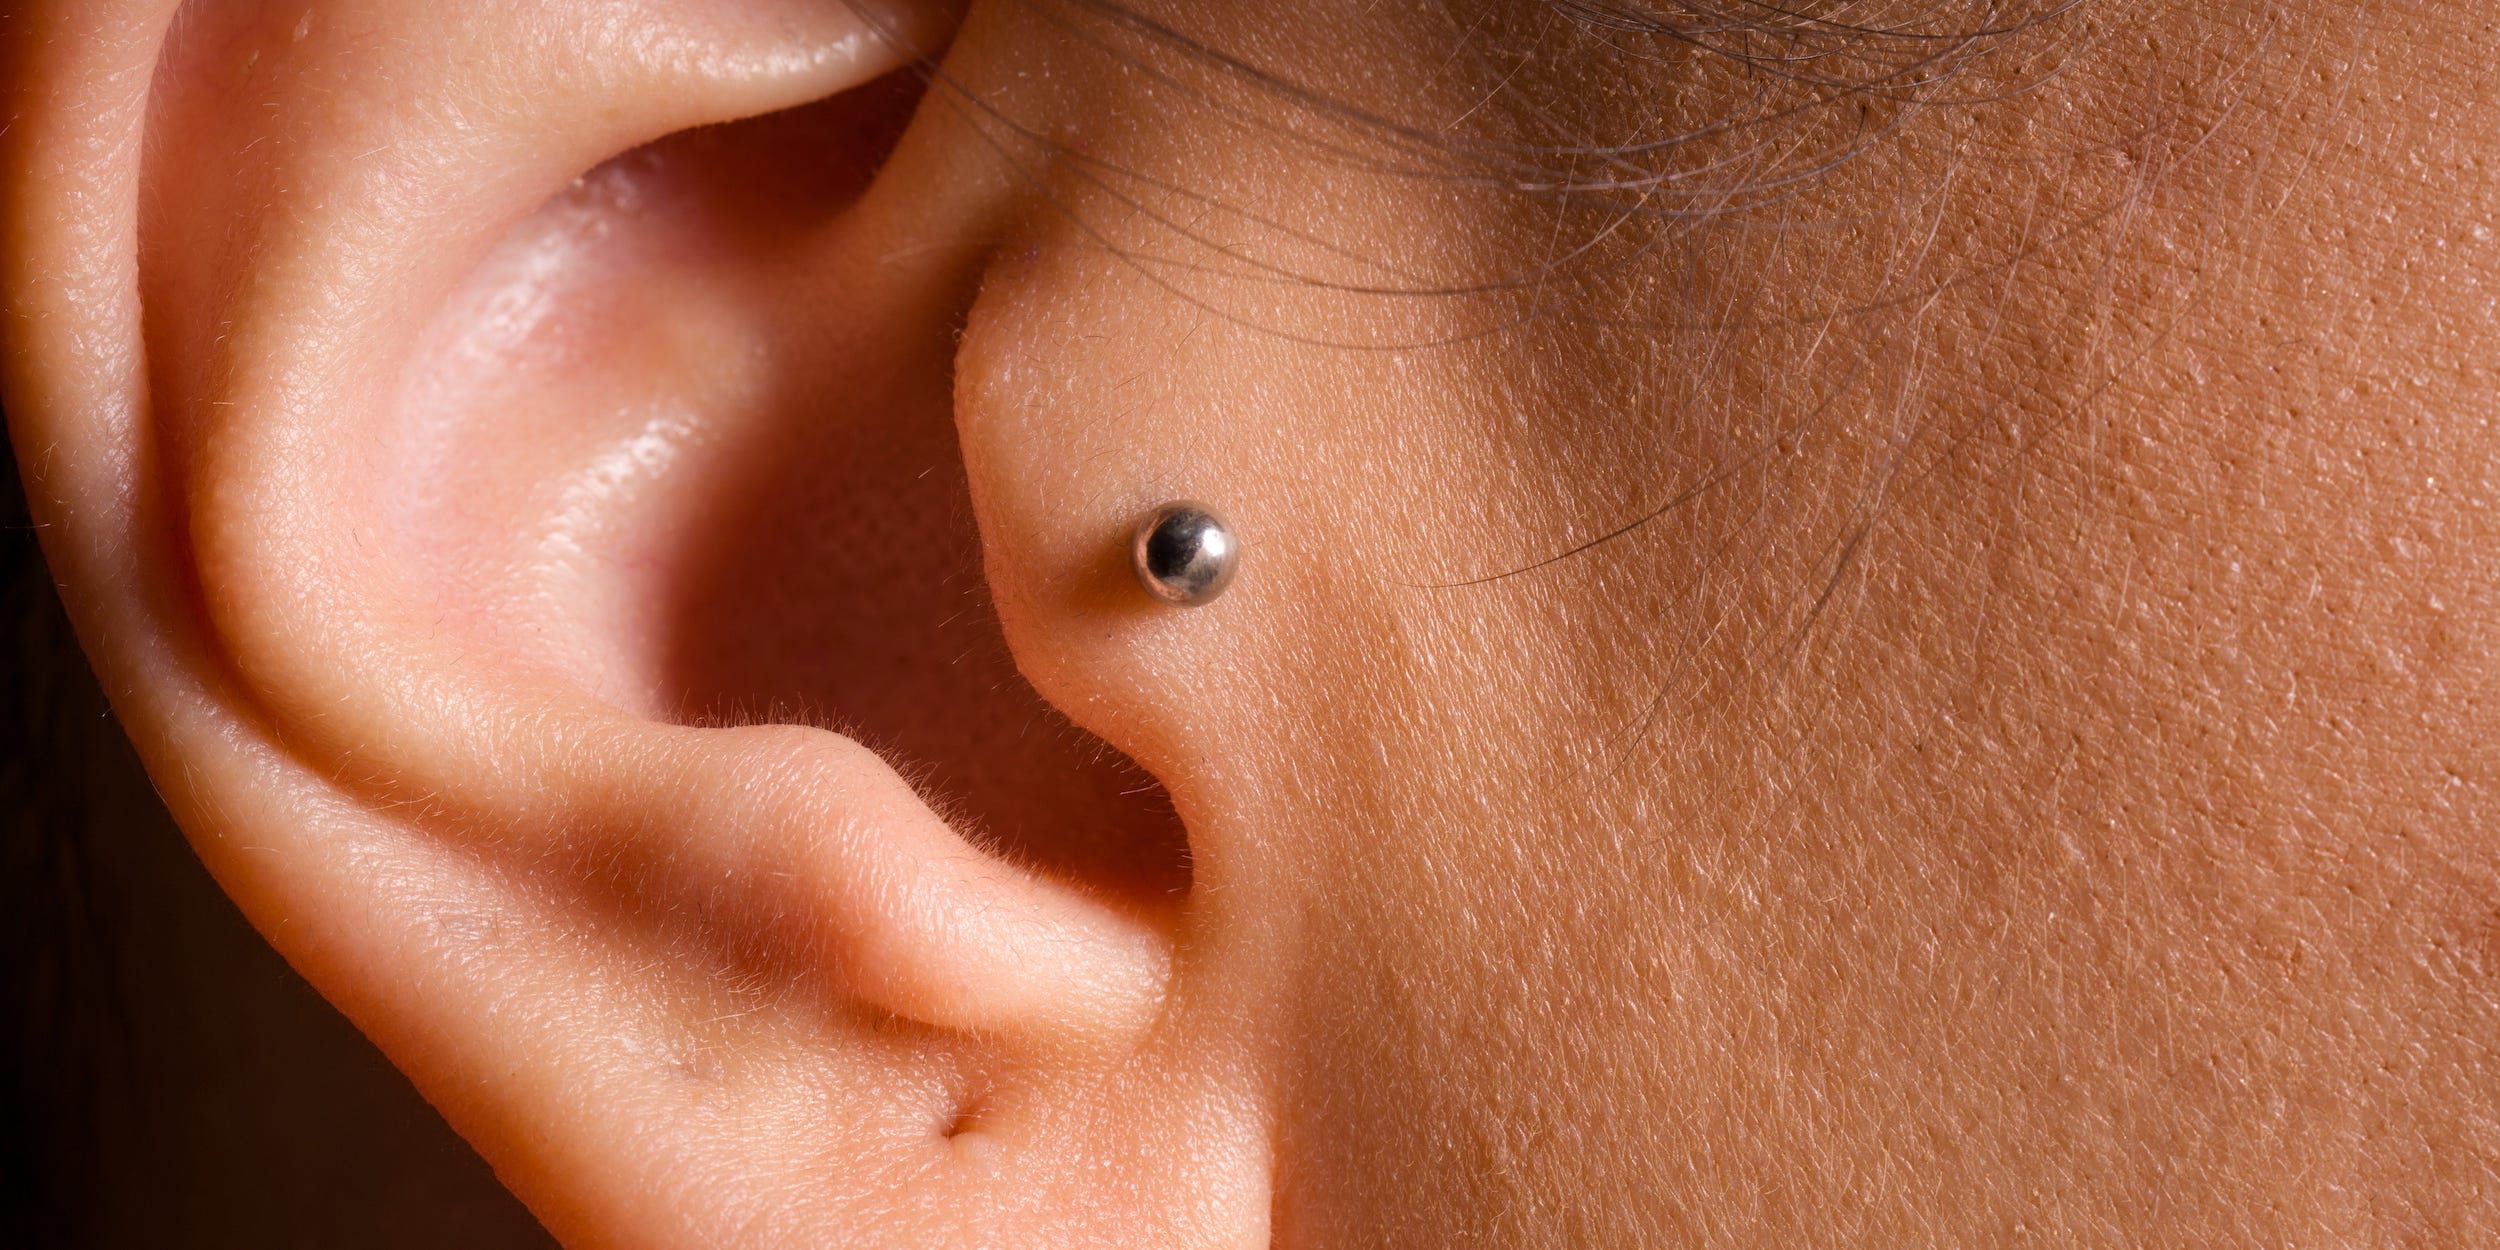 A close-up of an ear with a ball stud tragus piercing and an empty lobe piercing.